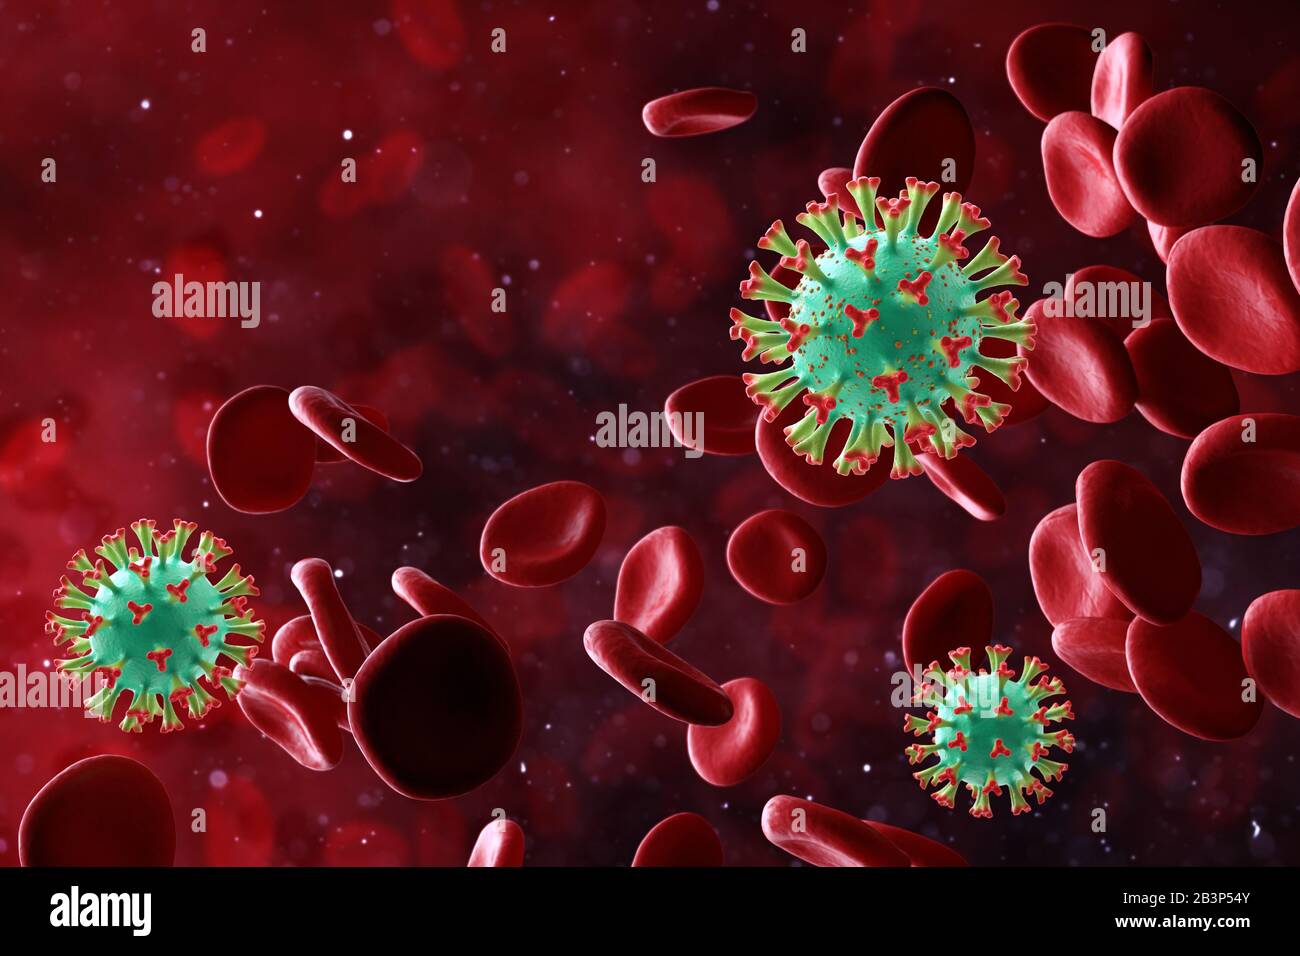 New pathogenic viruses causing serious disease and epidemic danger. 3d illustration of blood cells and structure of epidemic virus. Stock Photo